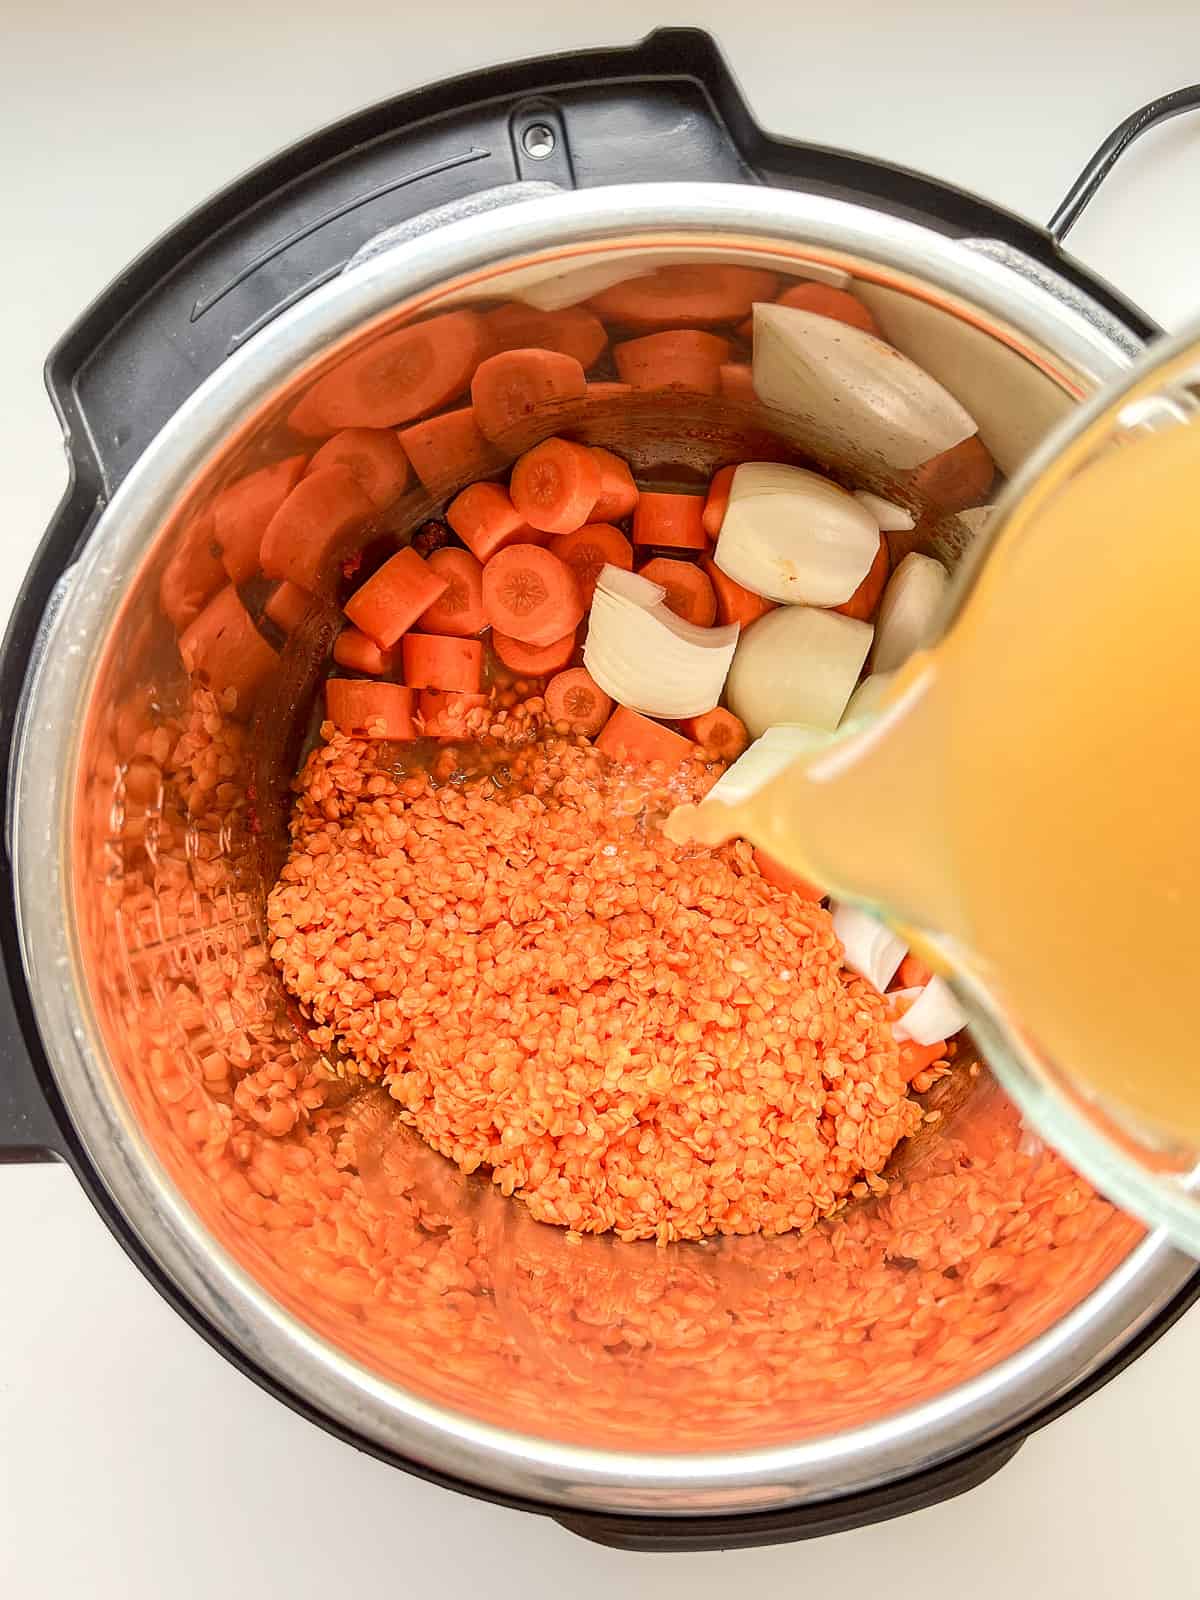 An image of veggie stock being poured into an instant pot.